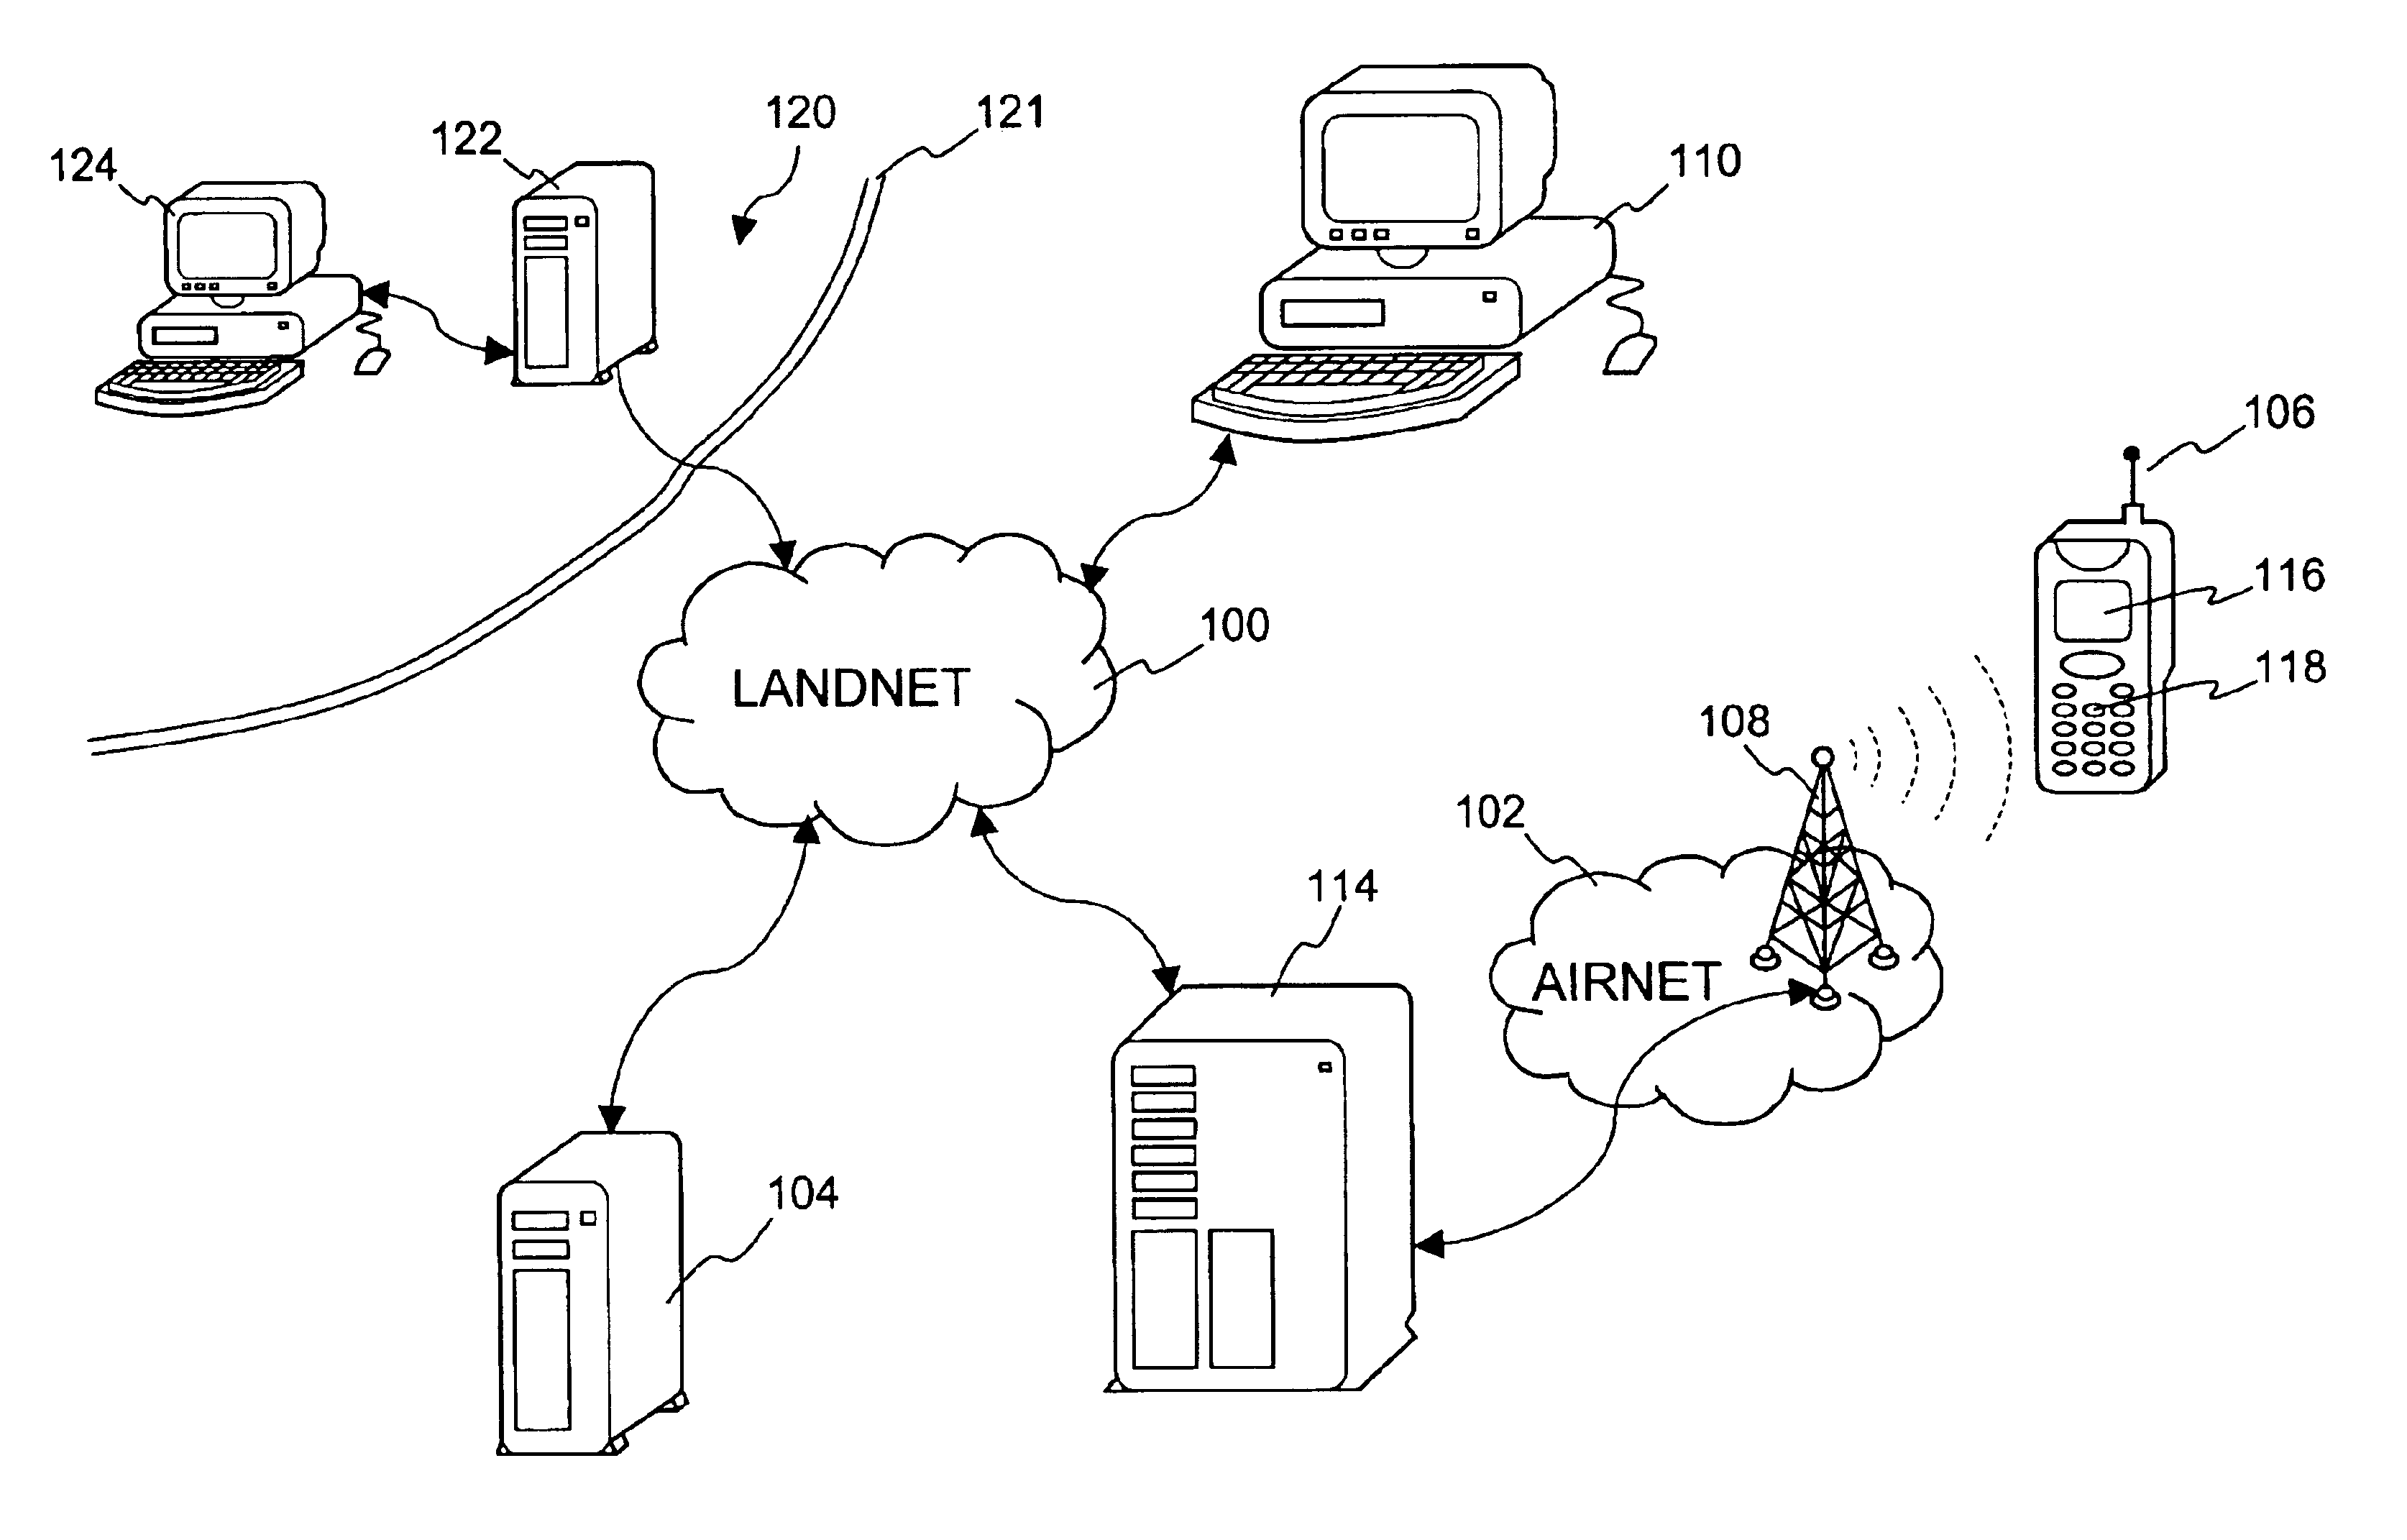 Method for generating and distributing telecom and internet revenue